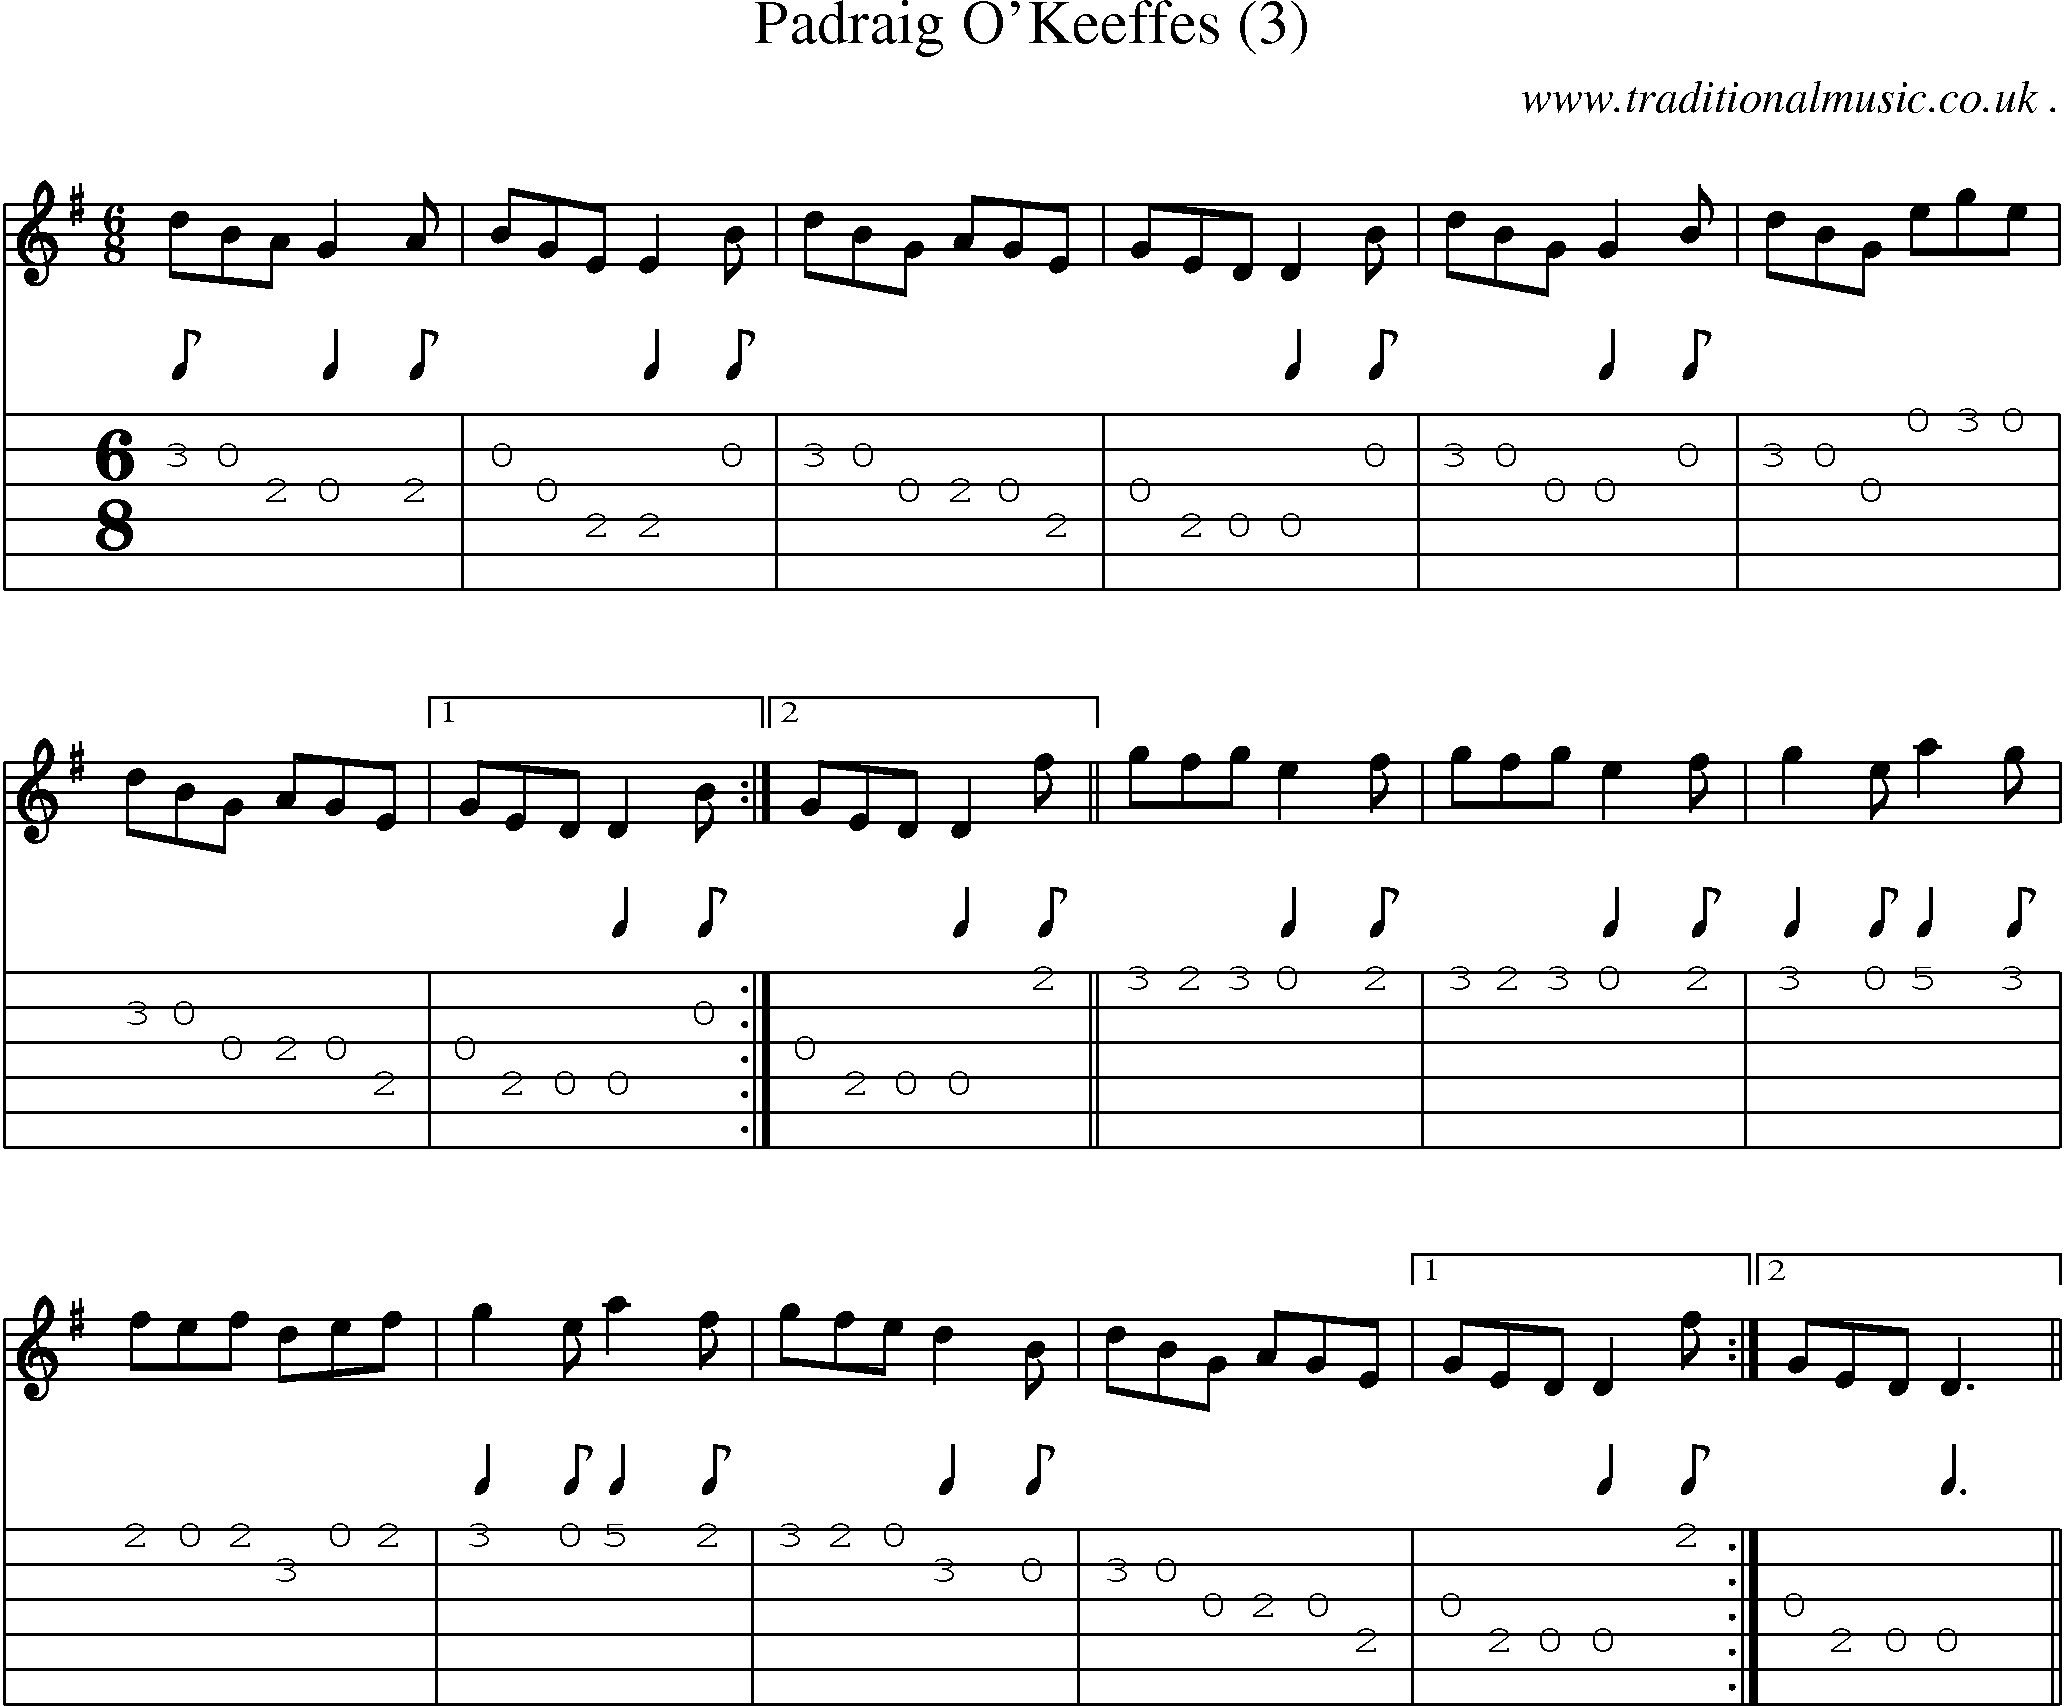 Sheet-Music and Guitar Tabs for Padraig Okeeffes (3)